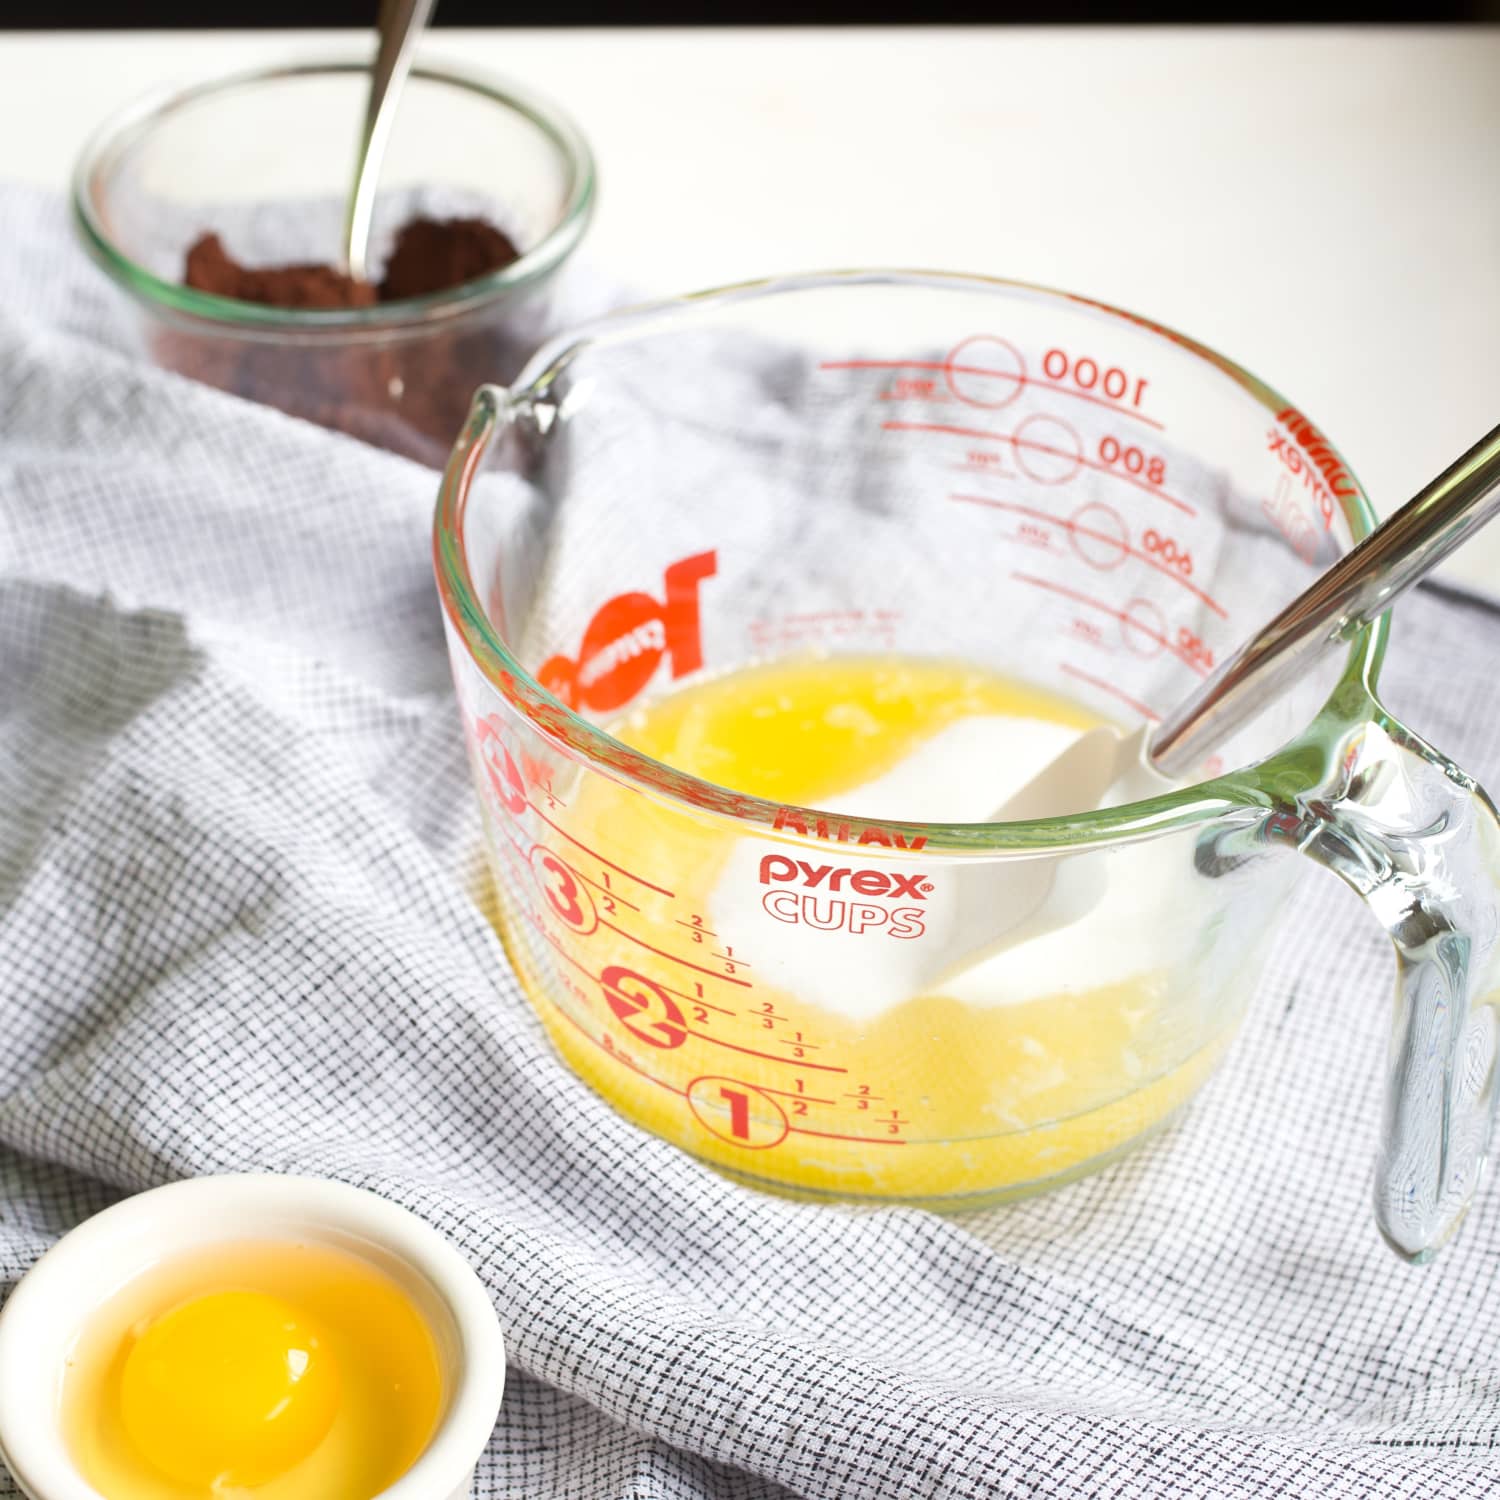 Pyrex 1 Cup Measuring Cup Review